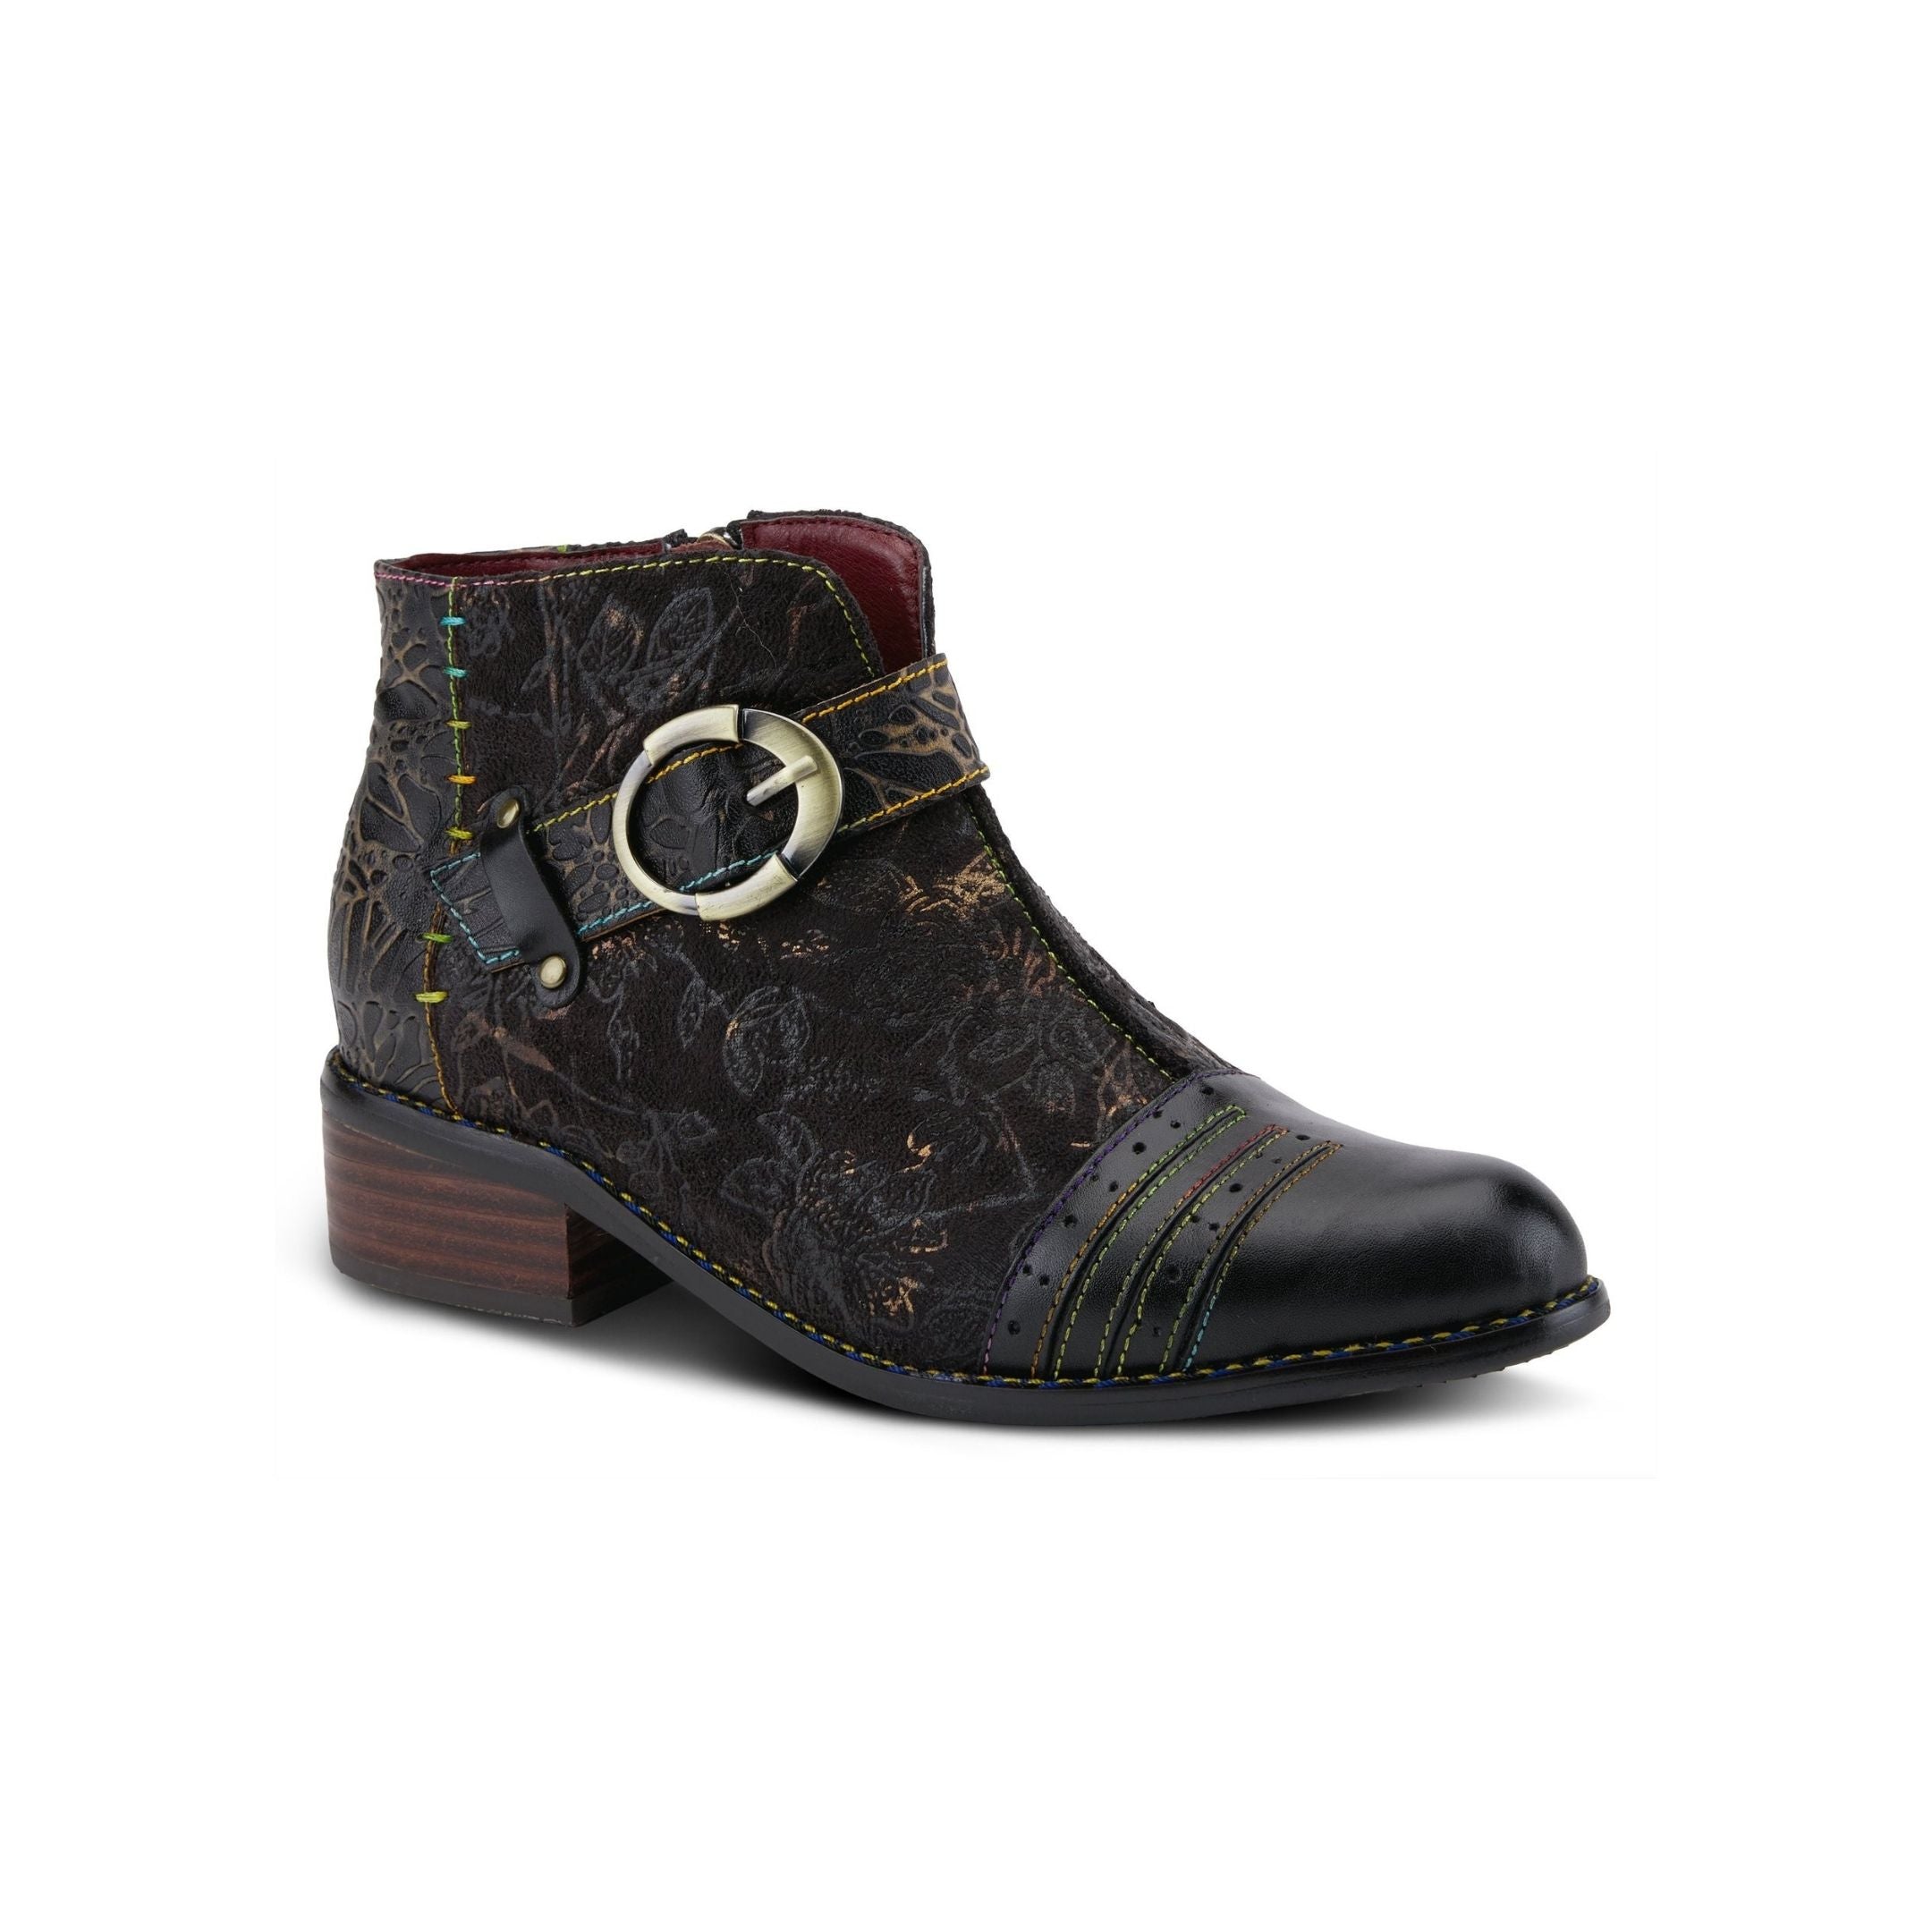 Black ankle boot with floral embossment and buckle detail